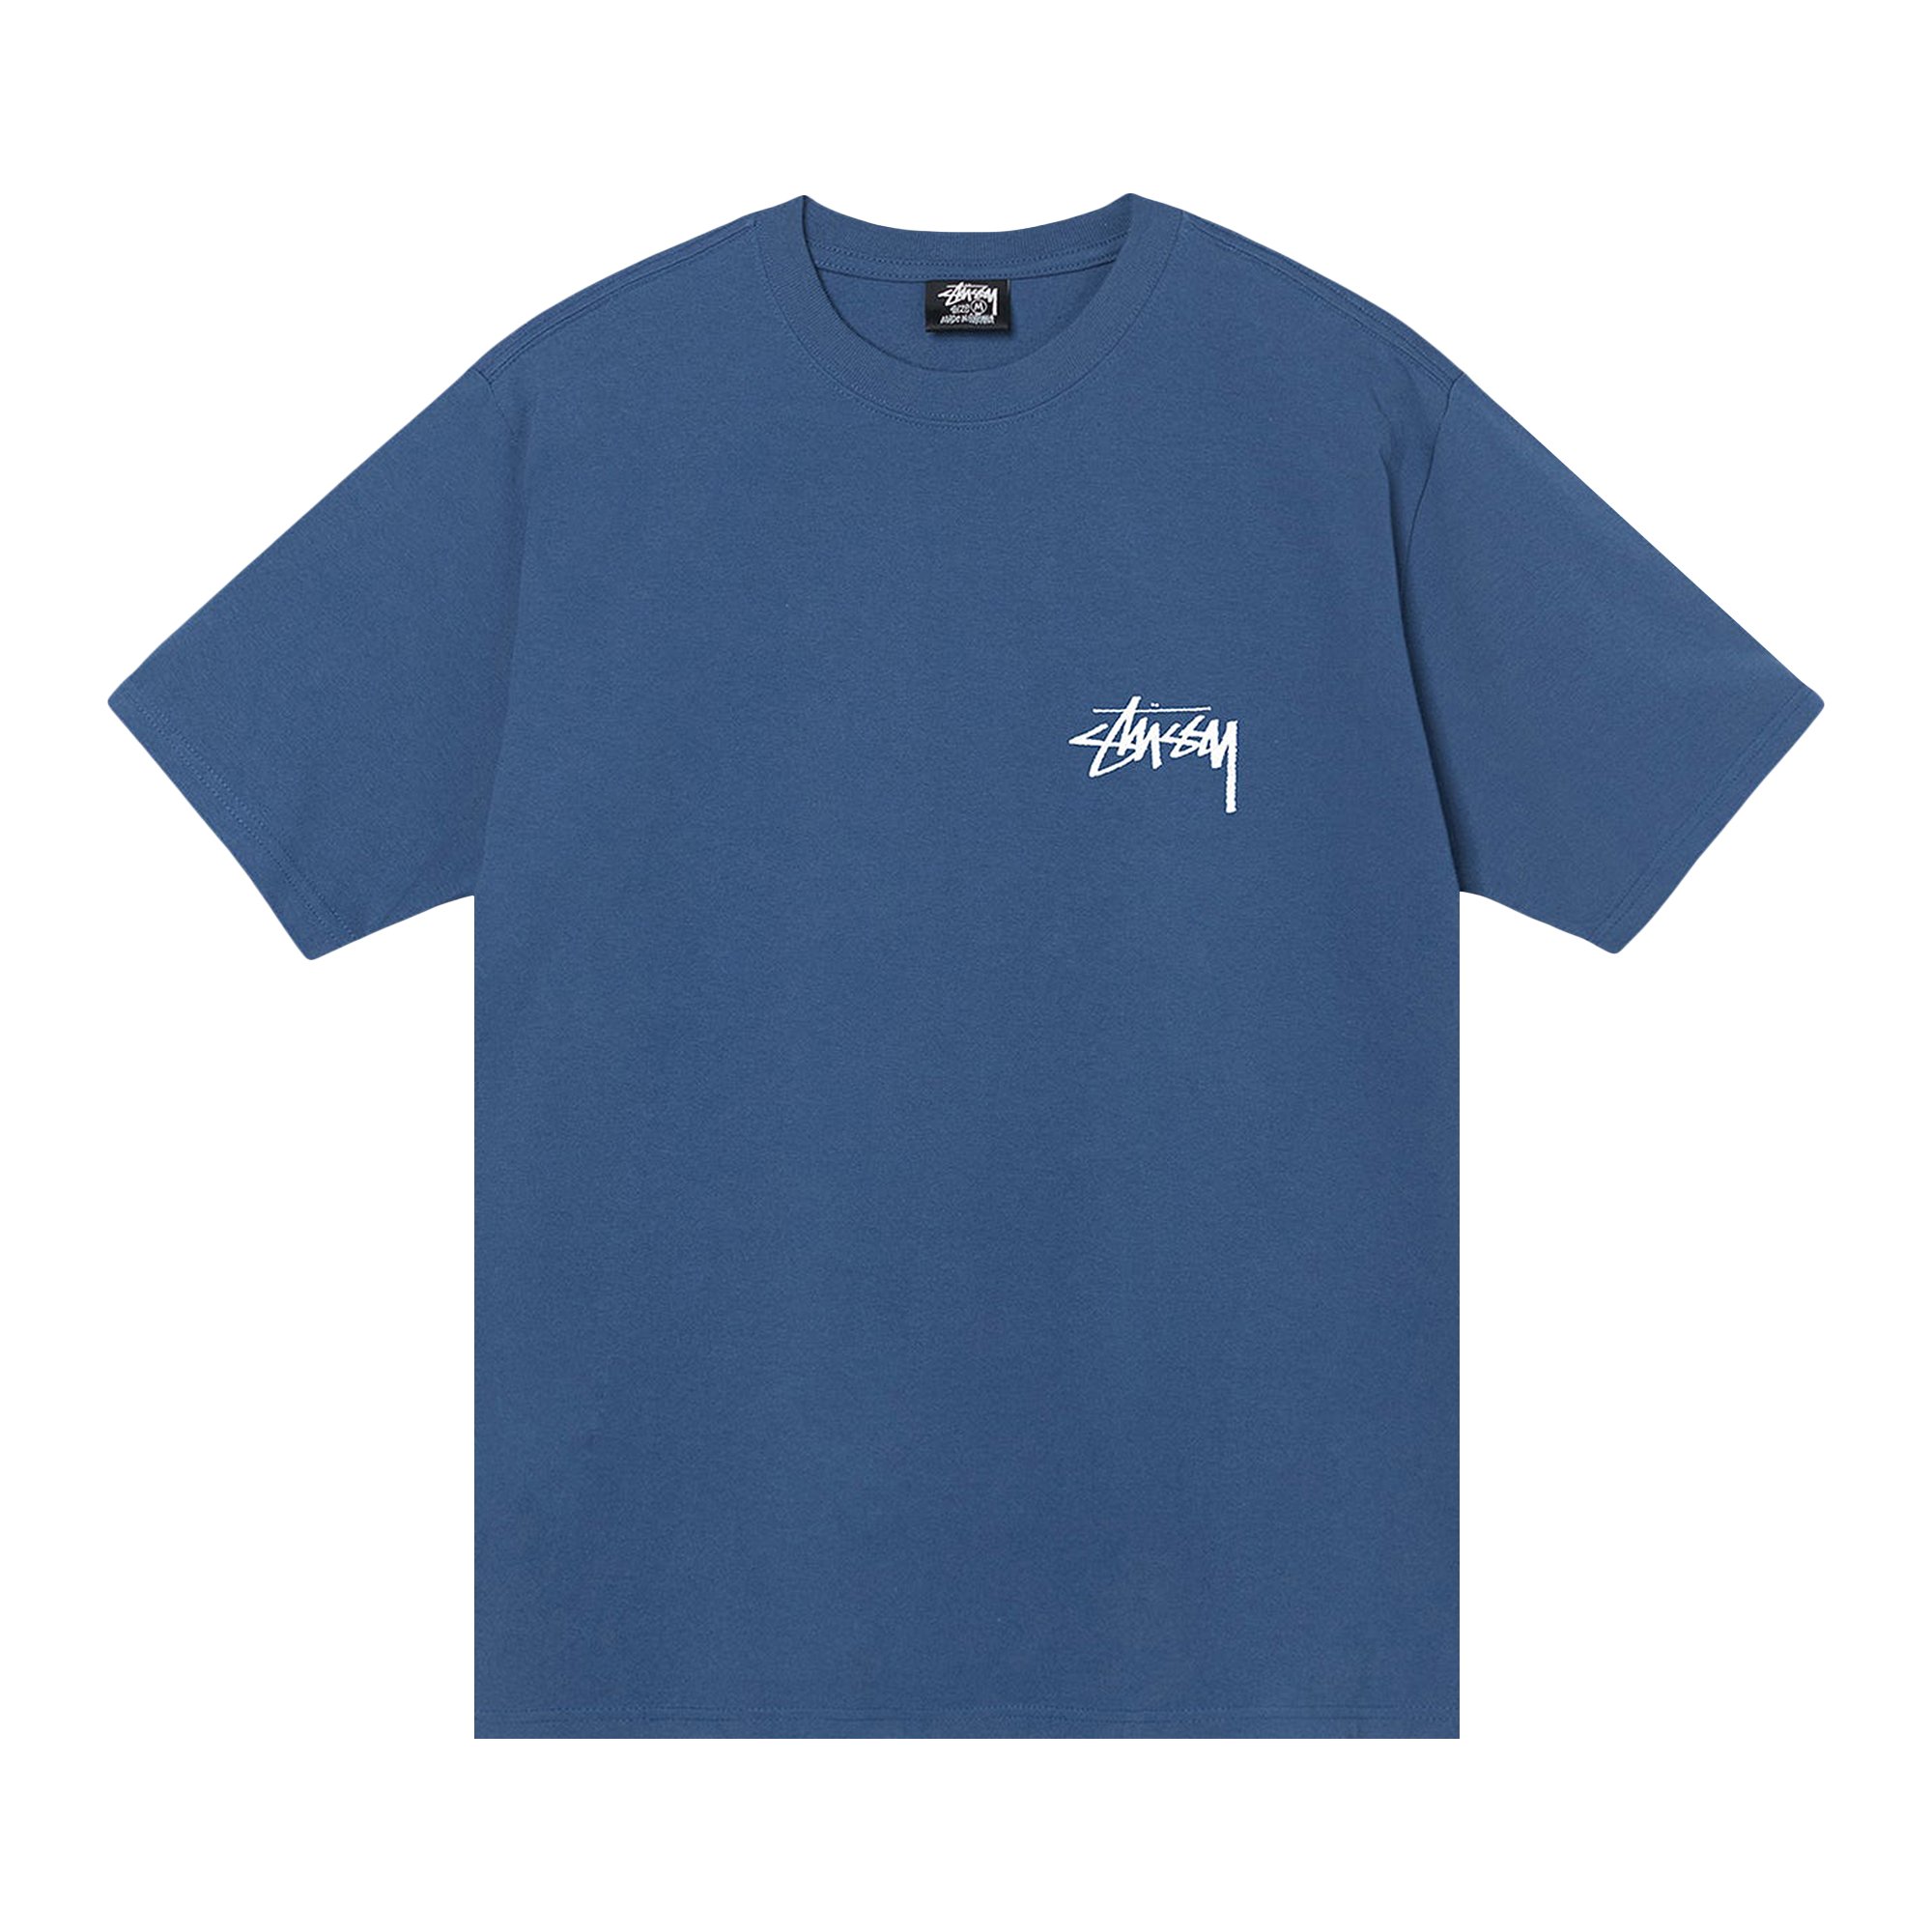 Buy Stussy Diced Out Tee 'Midnight' - 1904971 MIDN | GOAT